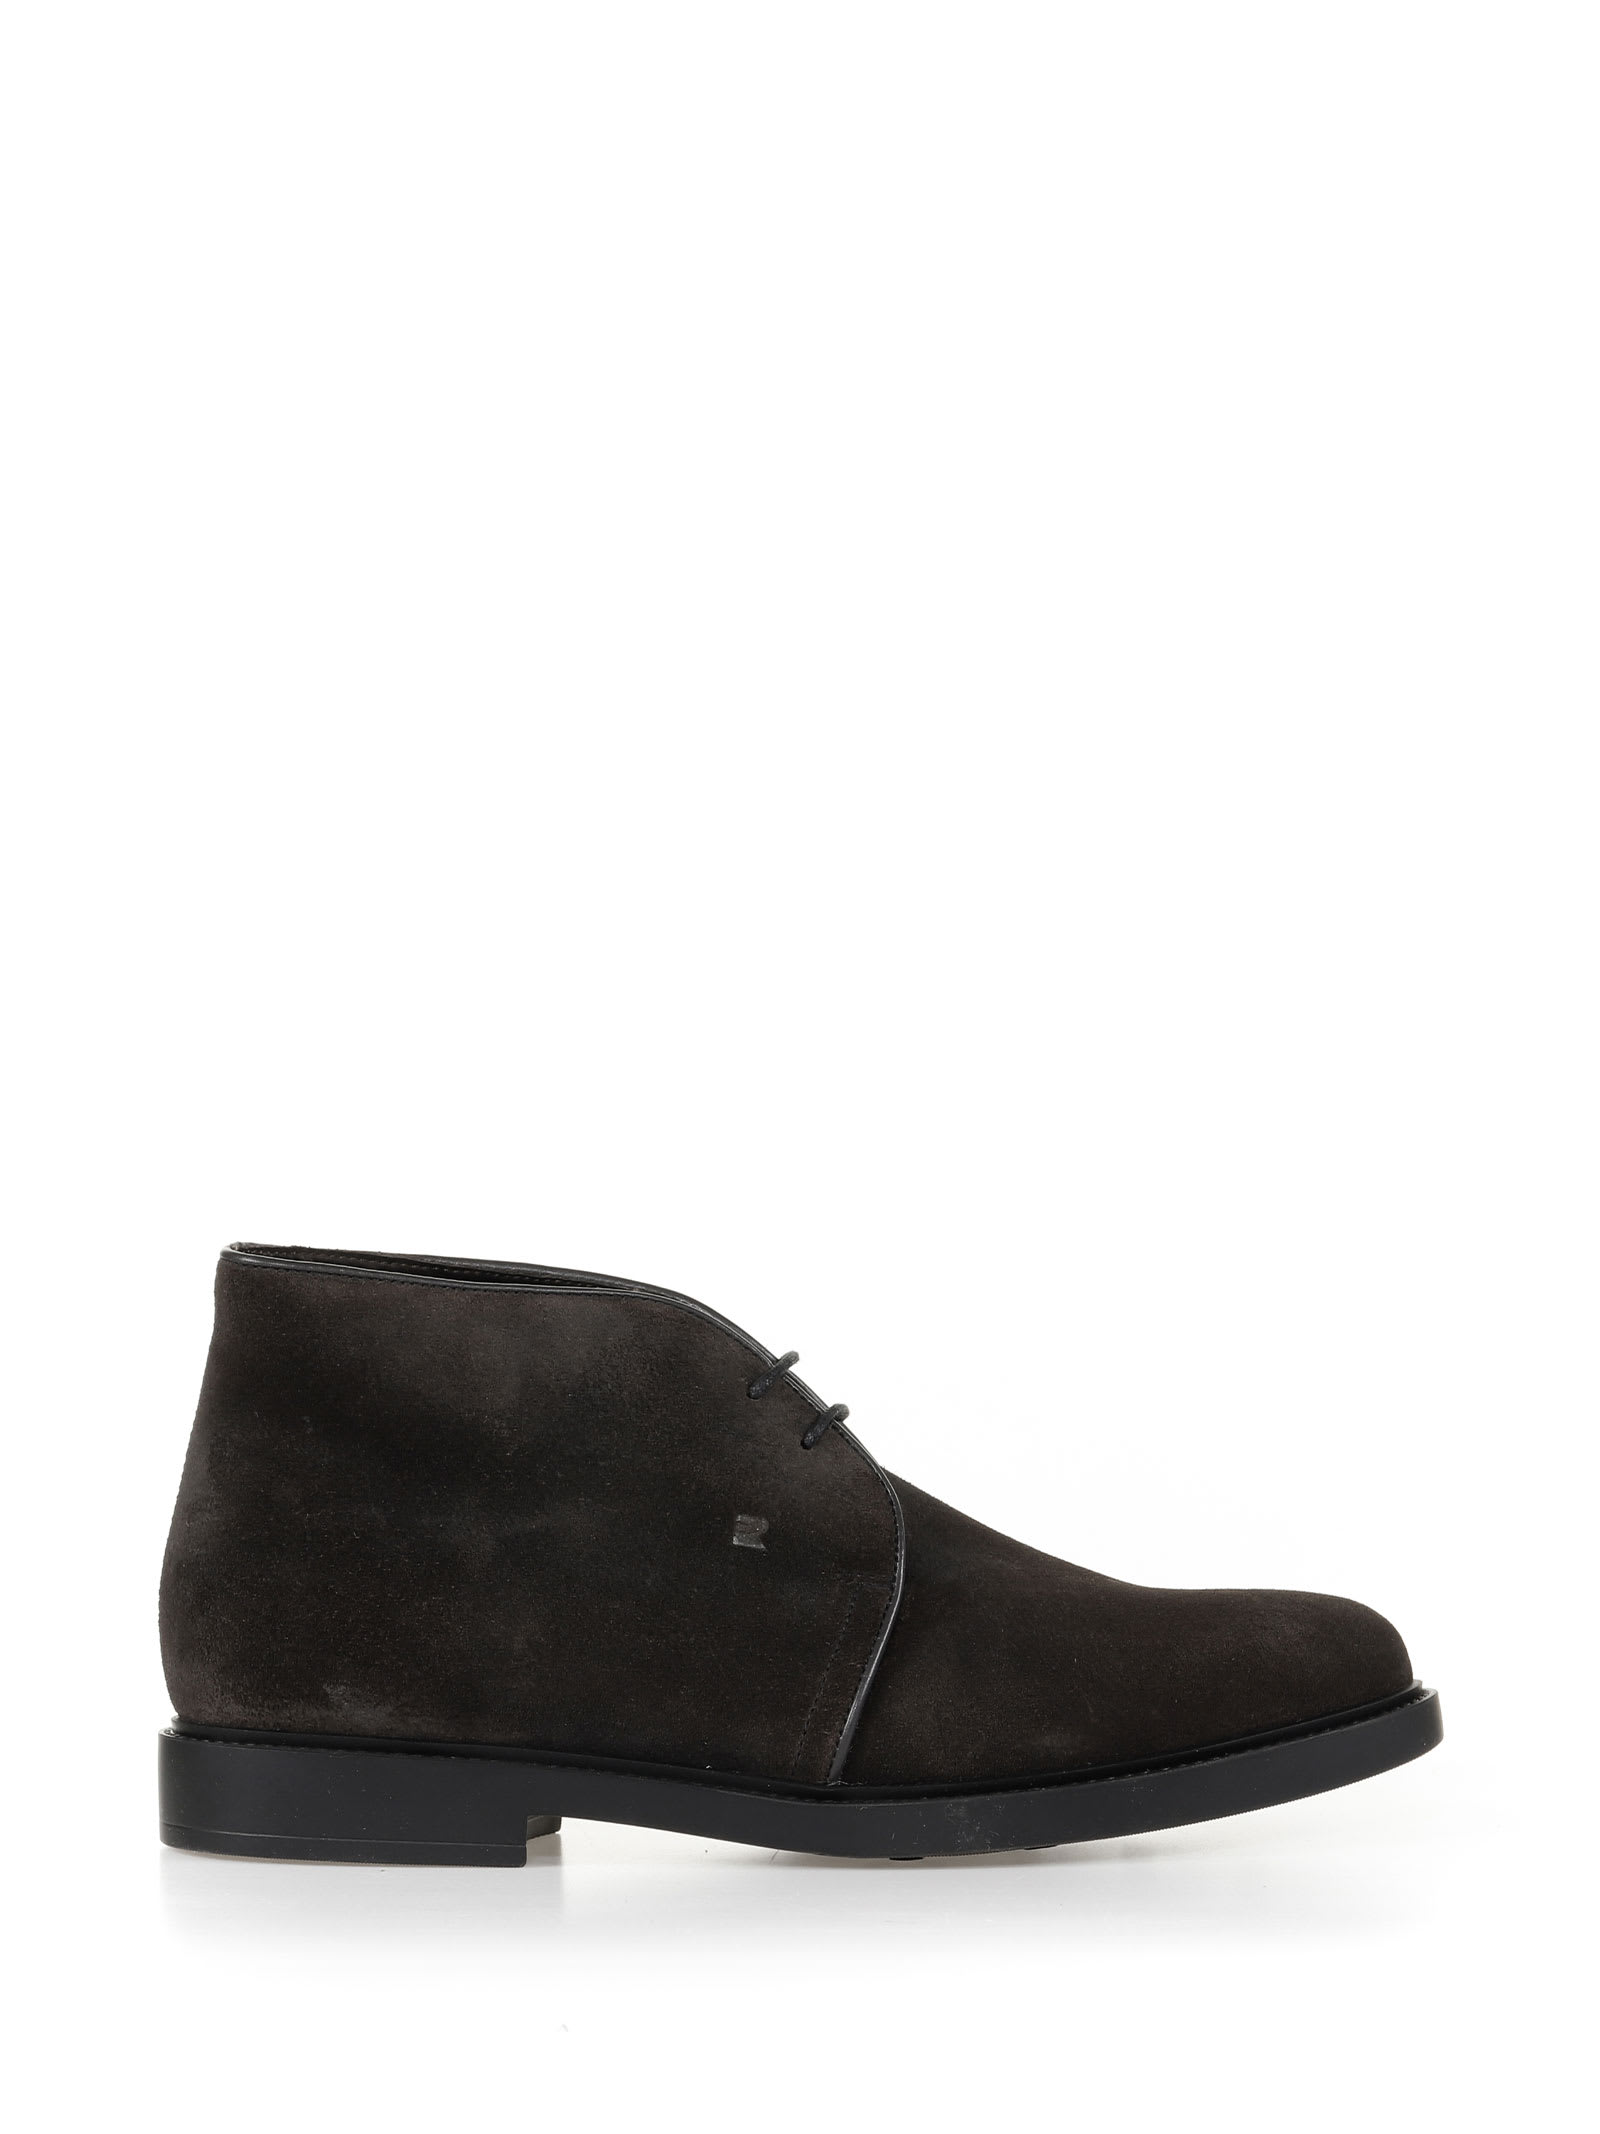 Fratelli Rossetti One Ankle Boot In Suede